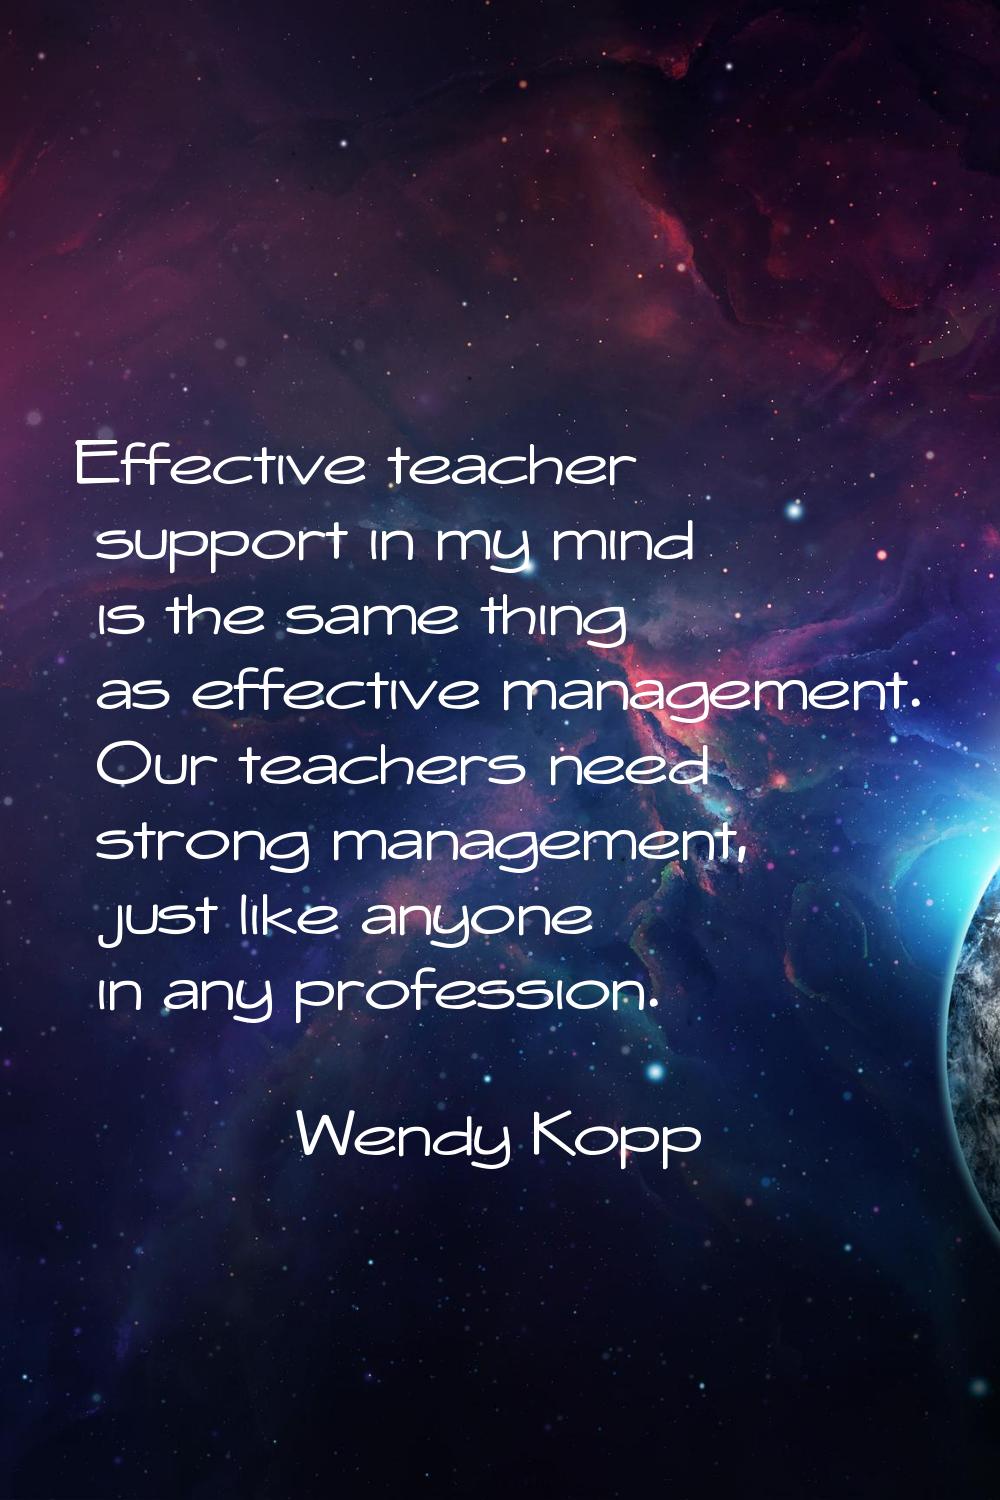 Effective teacher support in my mind is the same thing as effective management. Our teachers need s